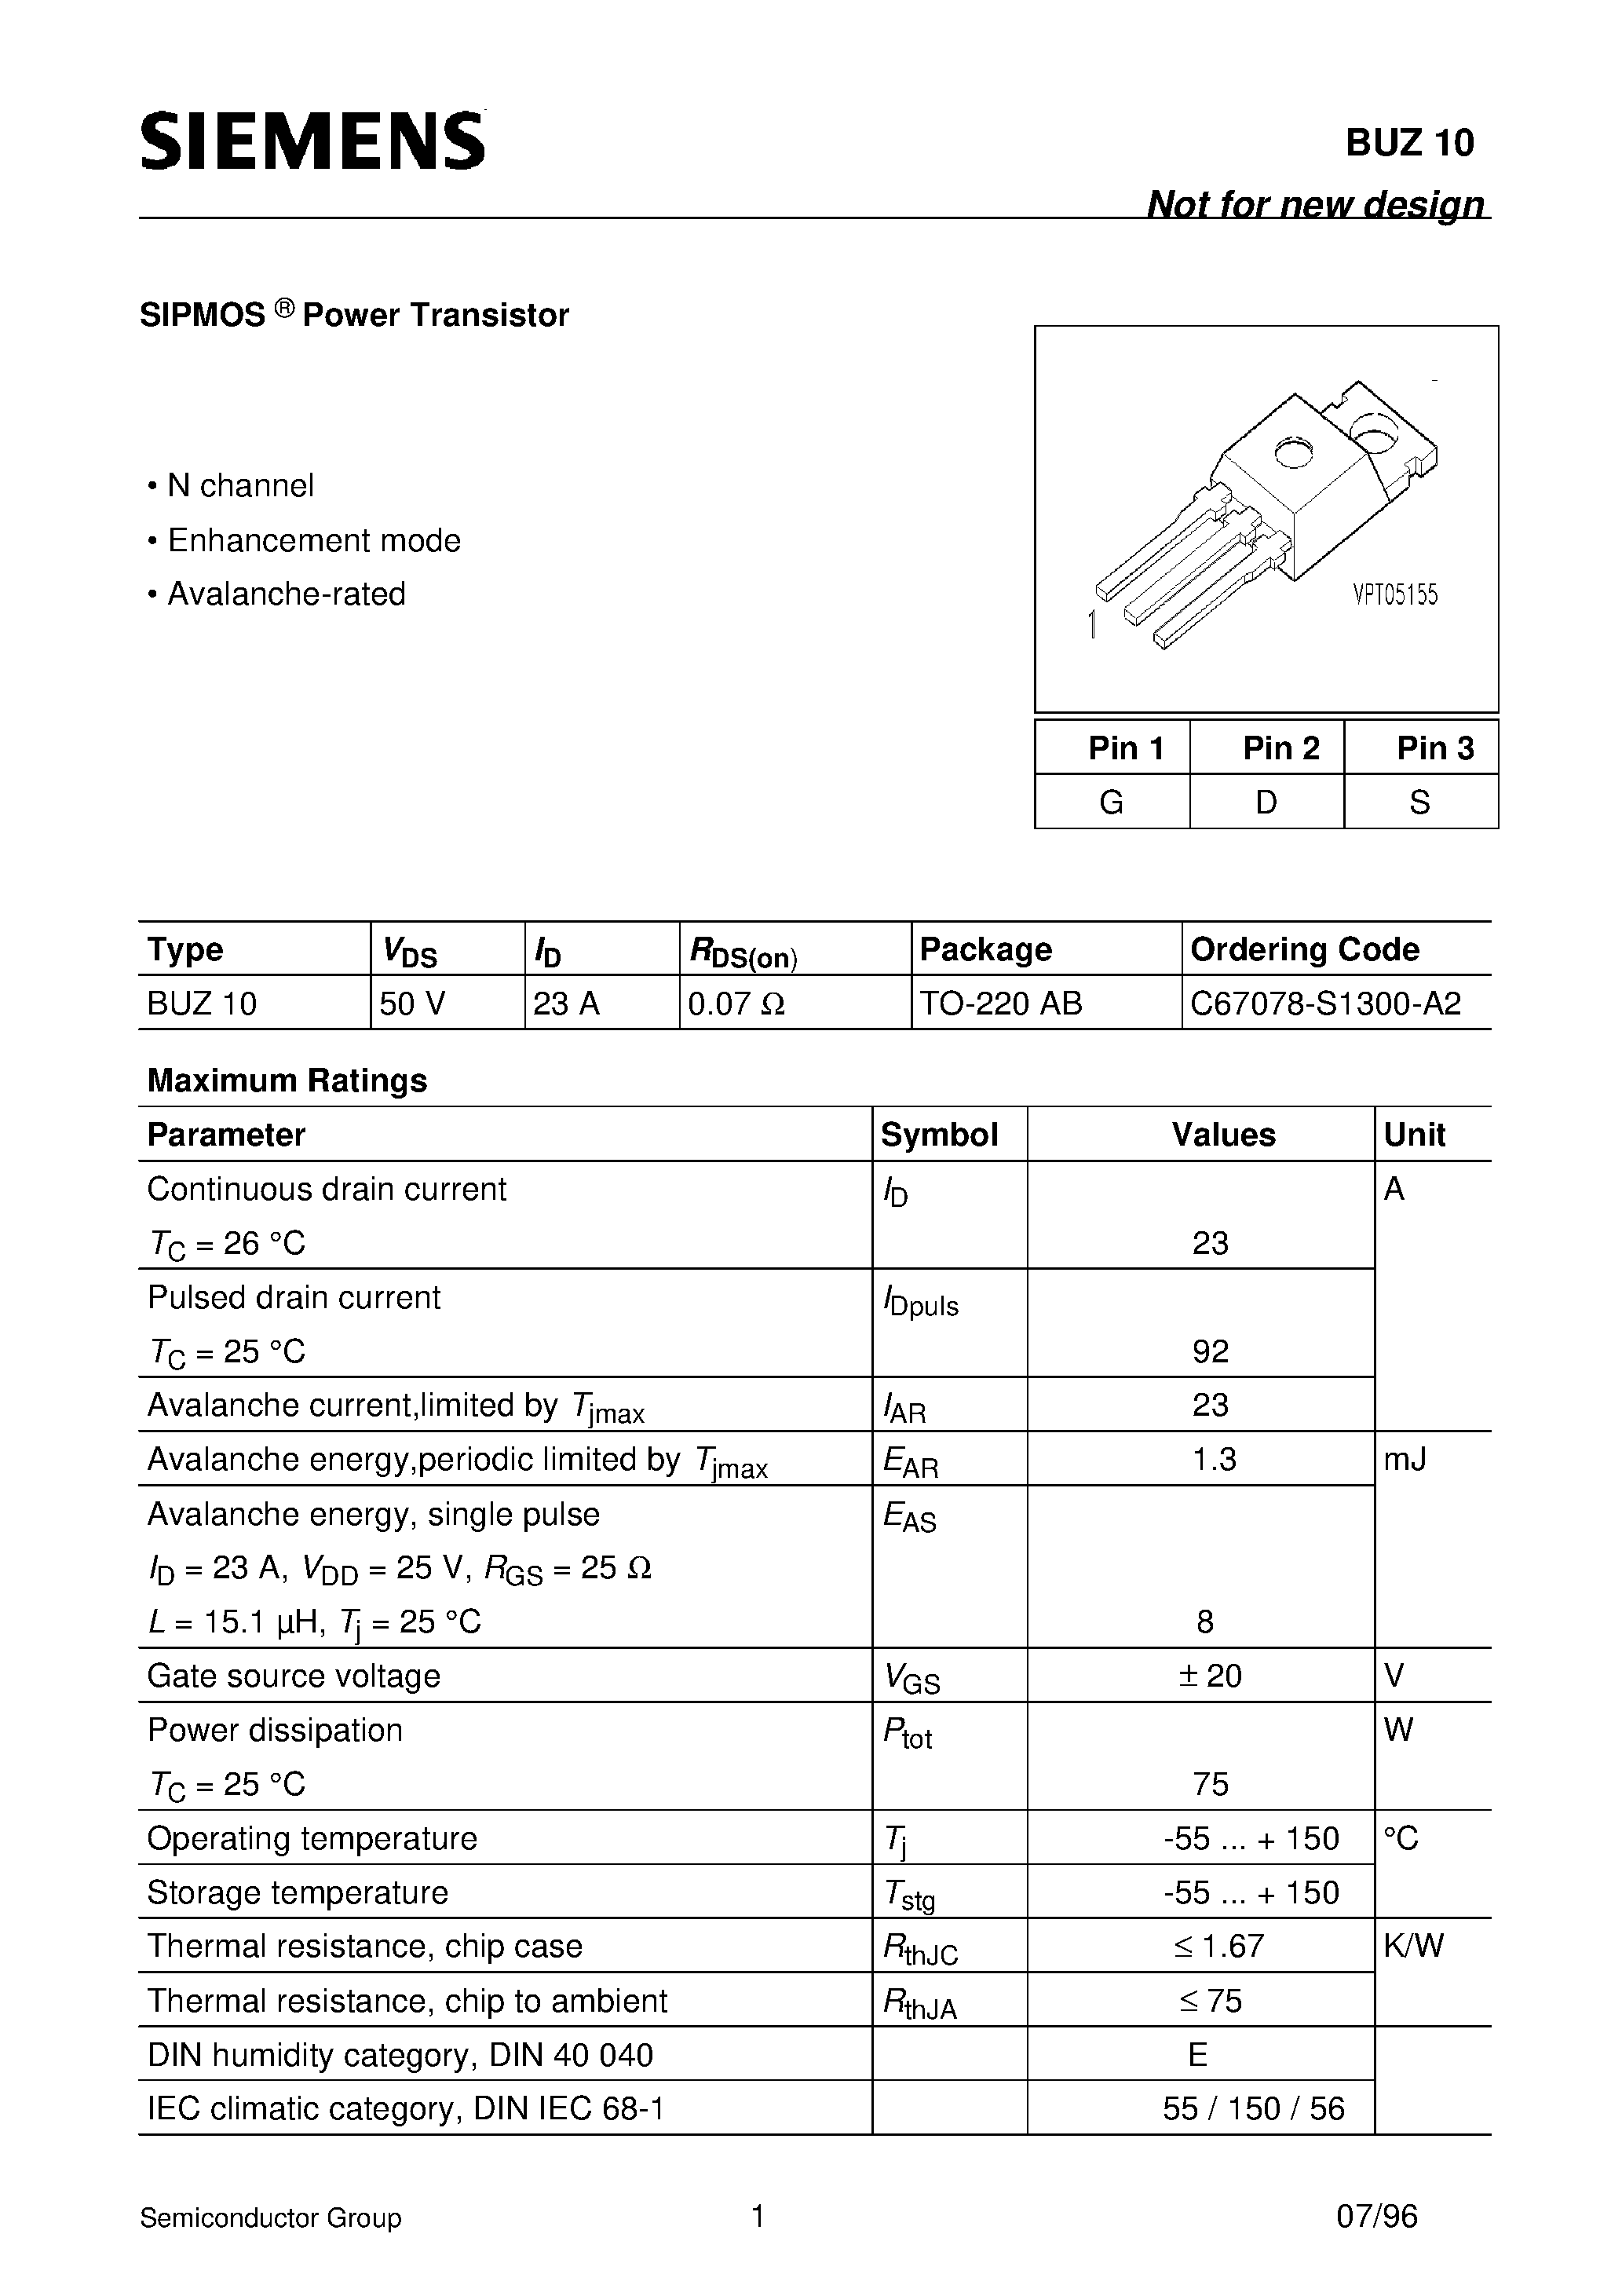 Datasheet BUZ10 - SIPMOS Power Transistor (N channel Enhancement mode Avalanche-rated) page 1